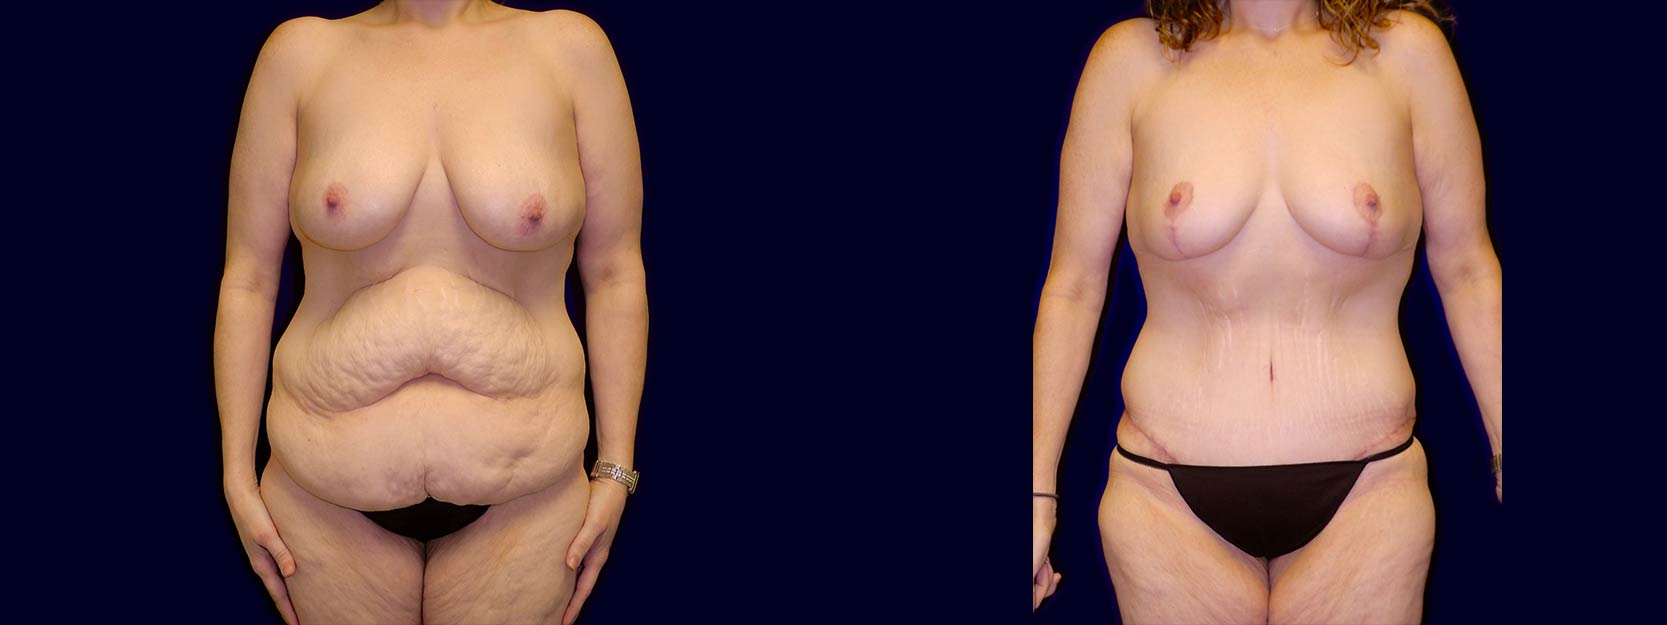 Frontal View - Surgery After Weight Loss - Breast Lift & Tummy Tuck